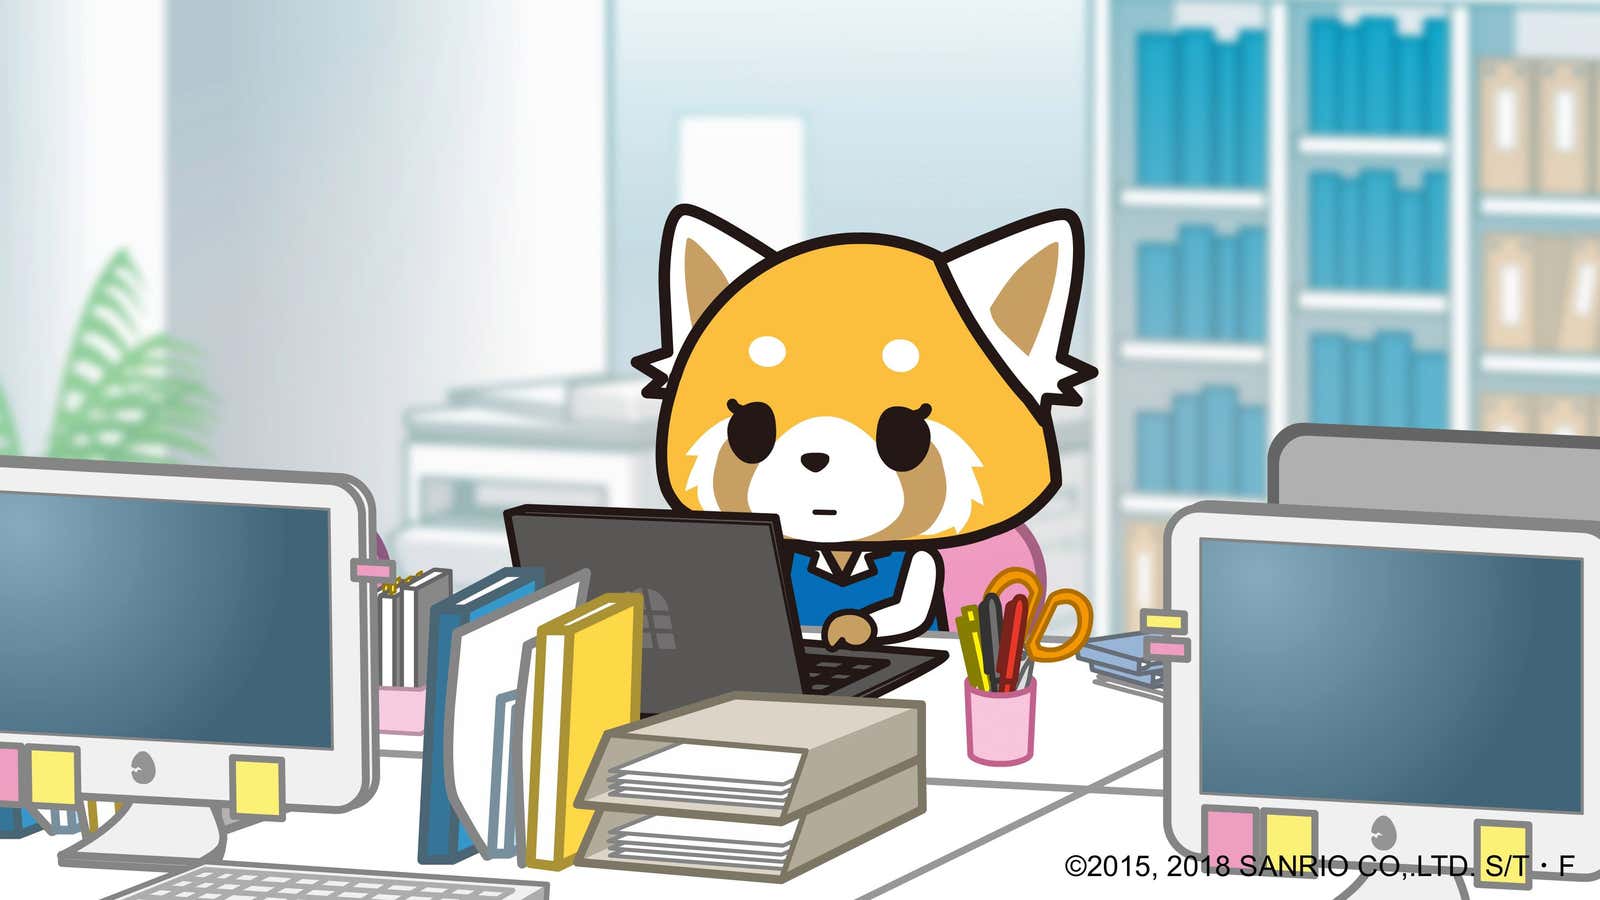 Aggretsuko' Shows the Power of Women Reclaiming Their Anger – The Dot and  Line